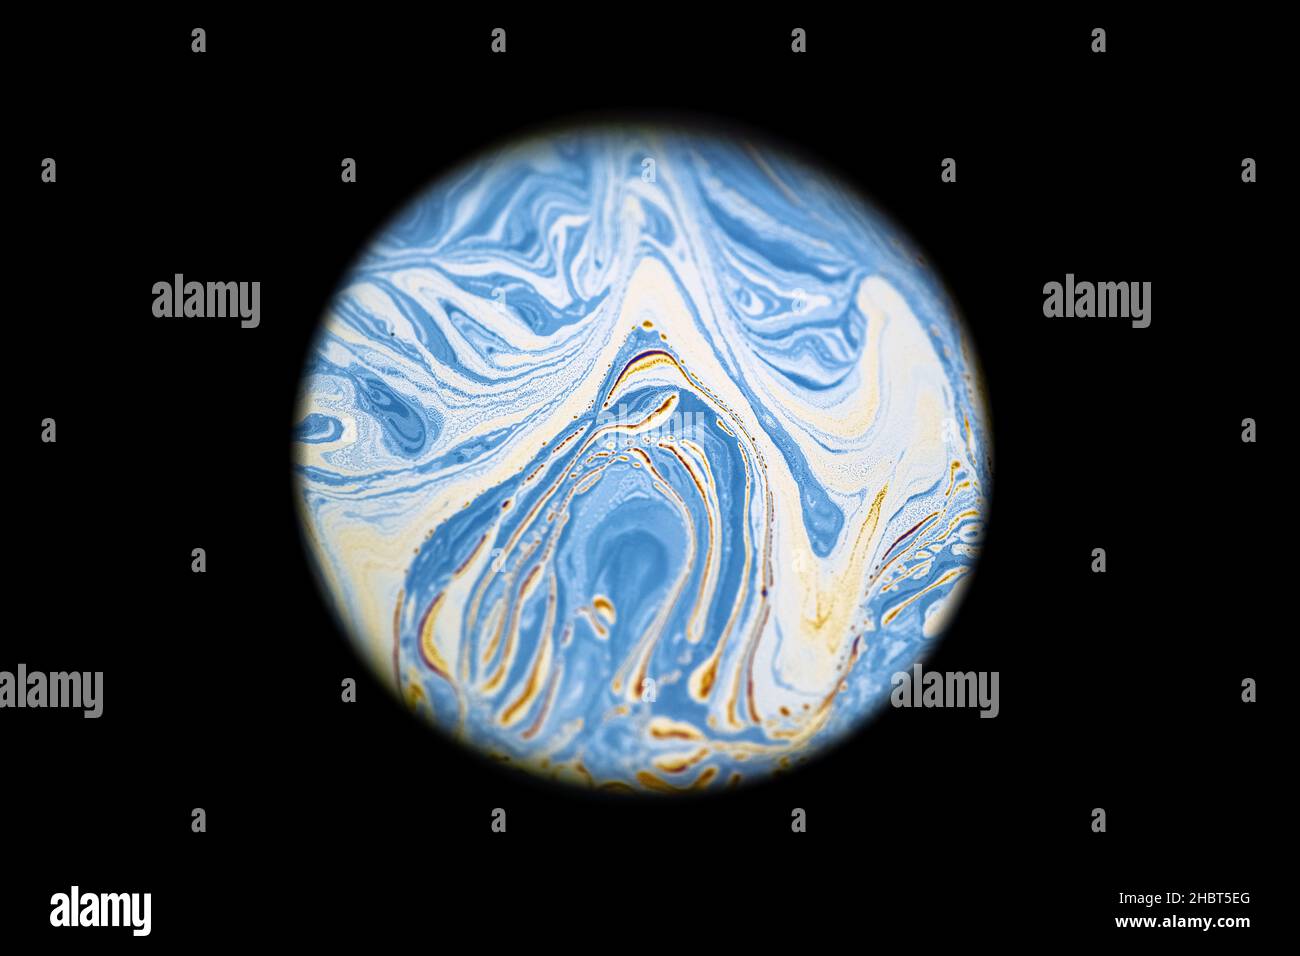 Multicolor psychedelic abstract round blue planet in universe. Closeup soap bubble like an alien planet on dark background Stock Photo